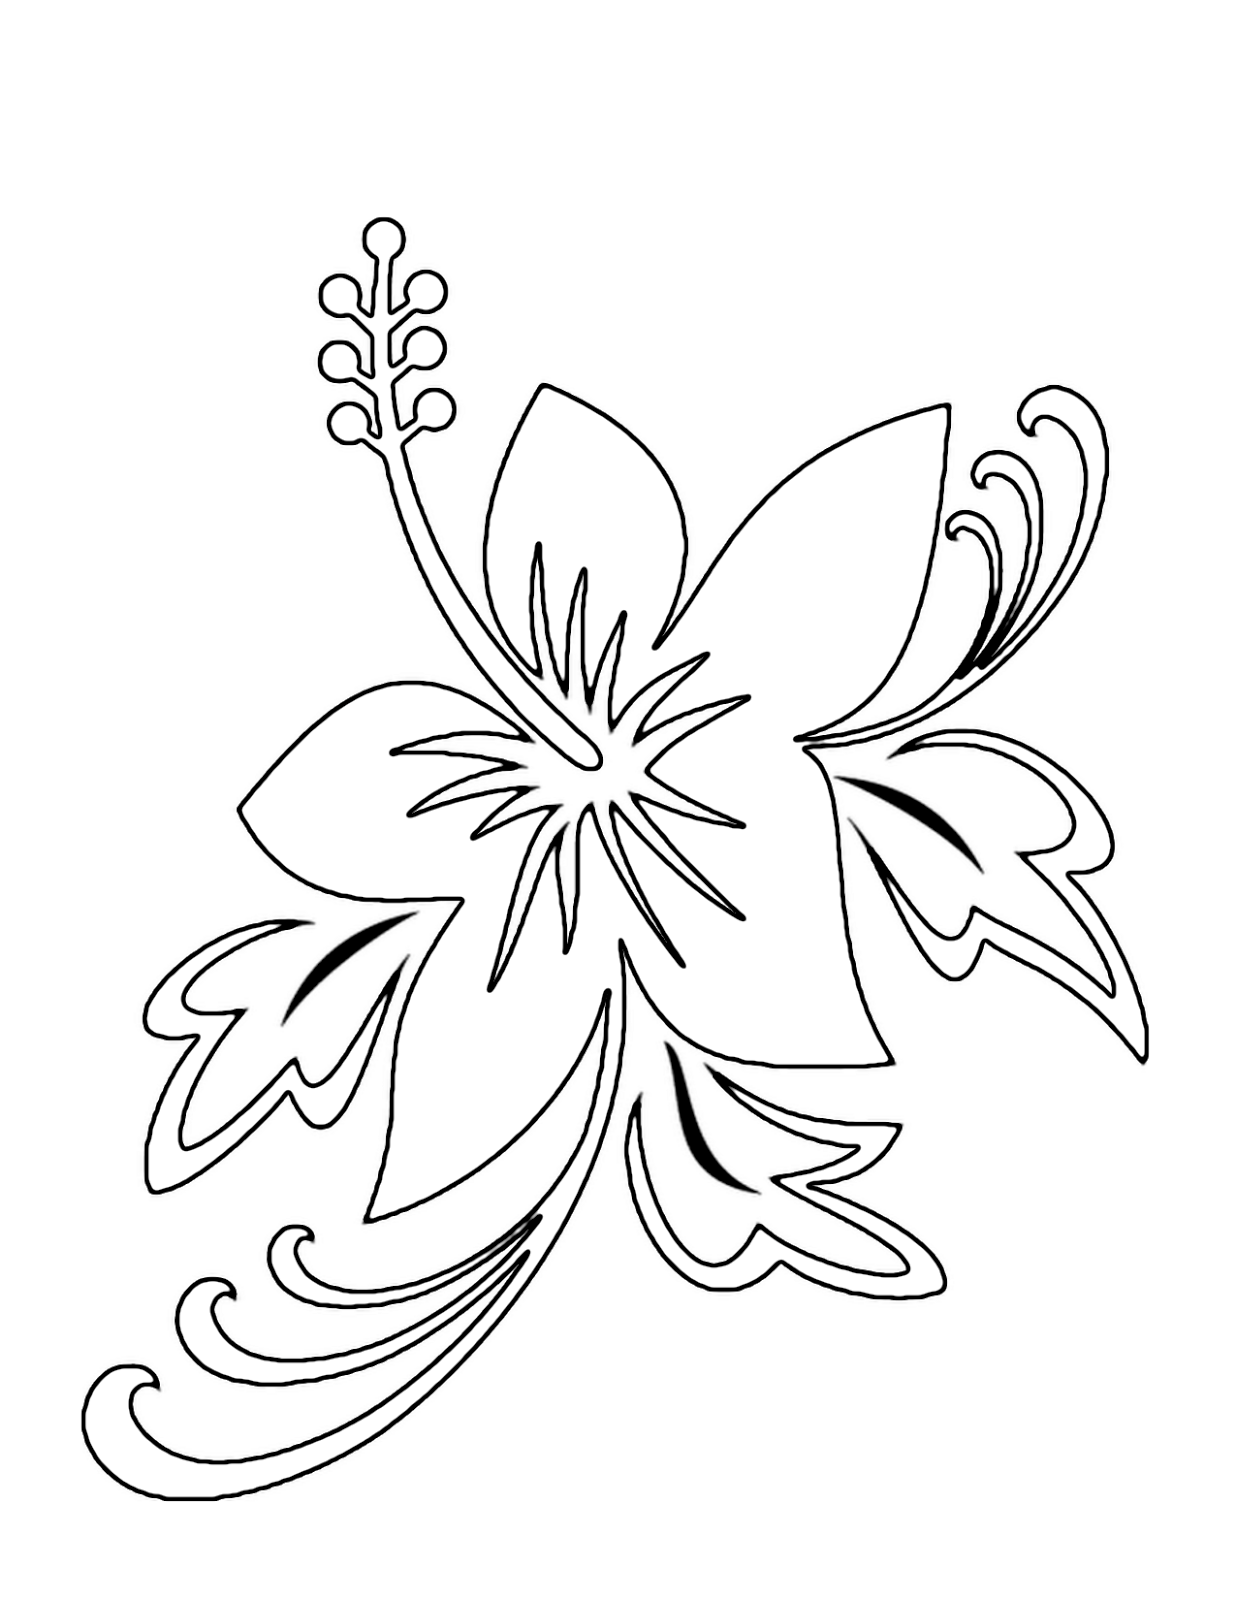 Flowers coloring pages | color printing | Flower | Coloring pages free | #8